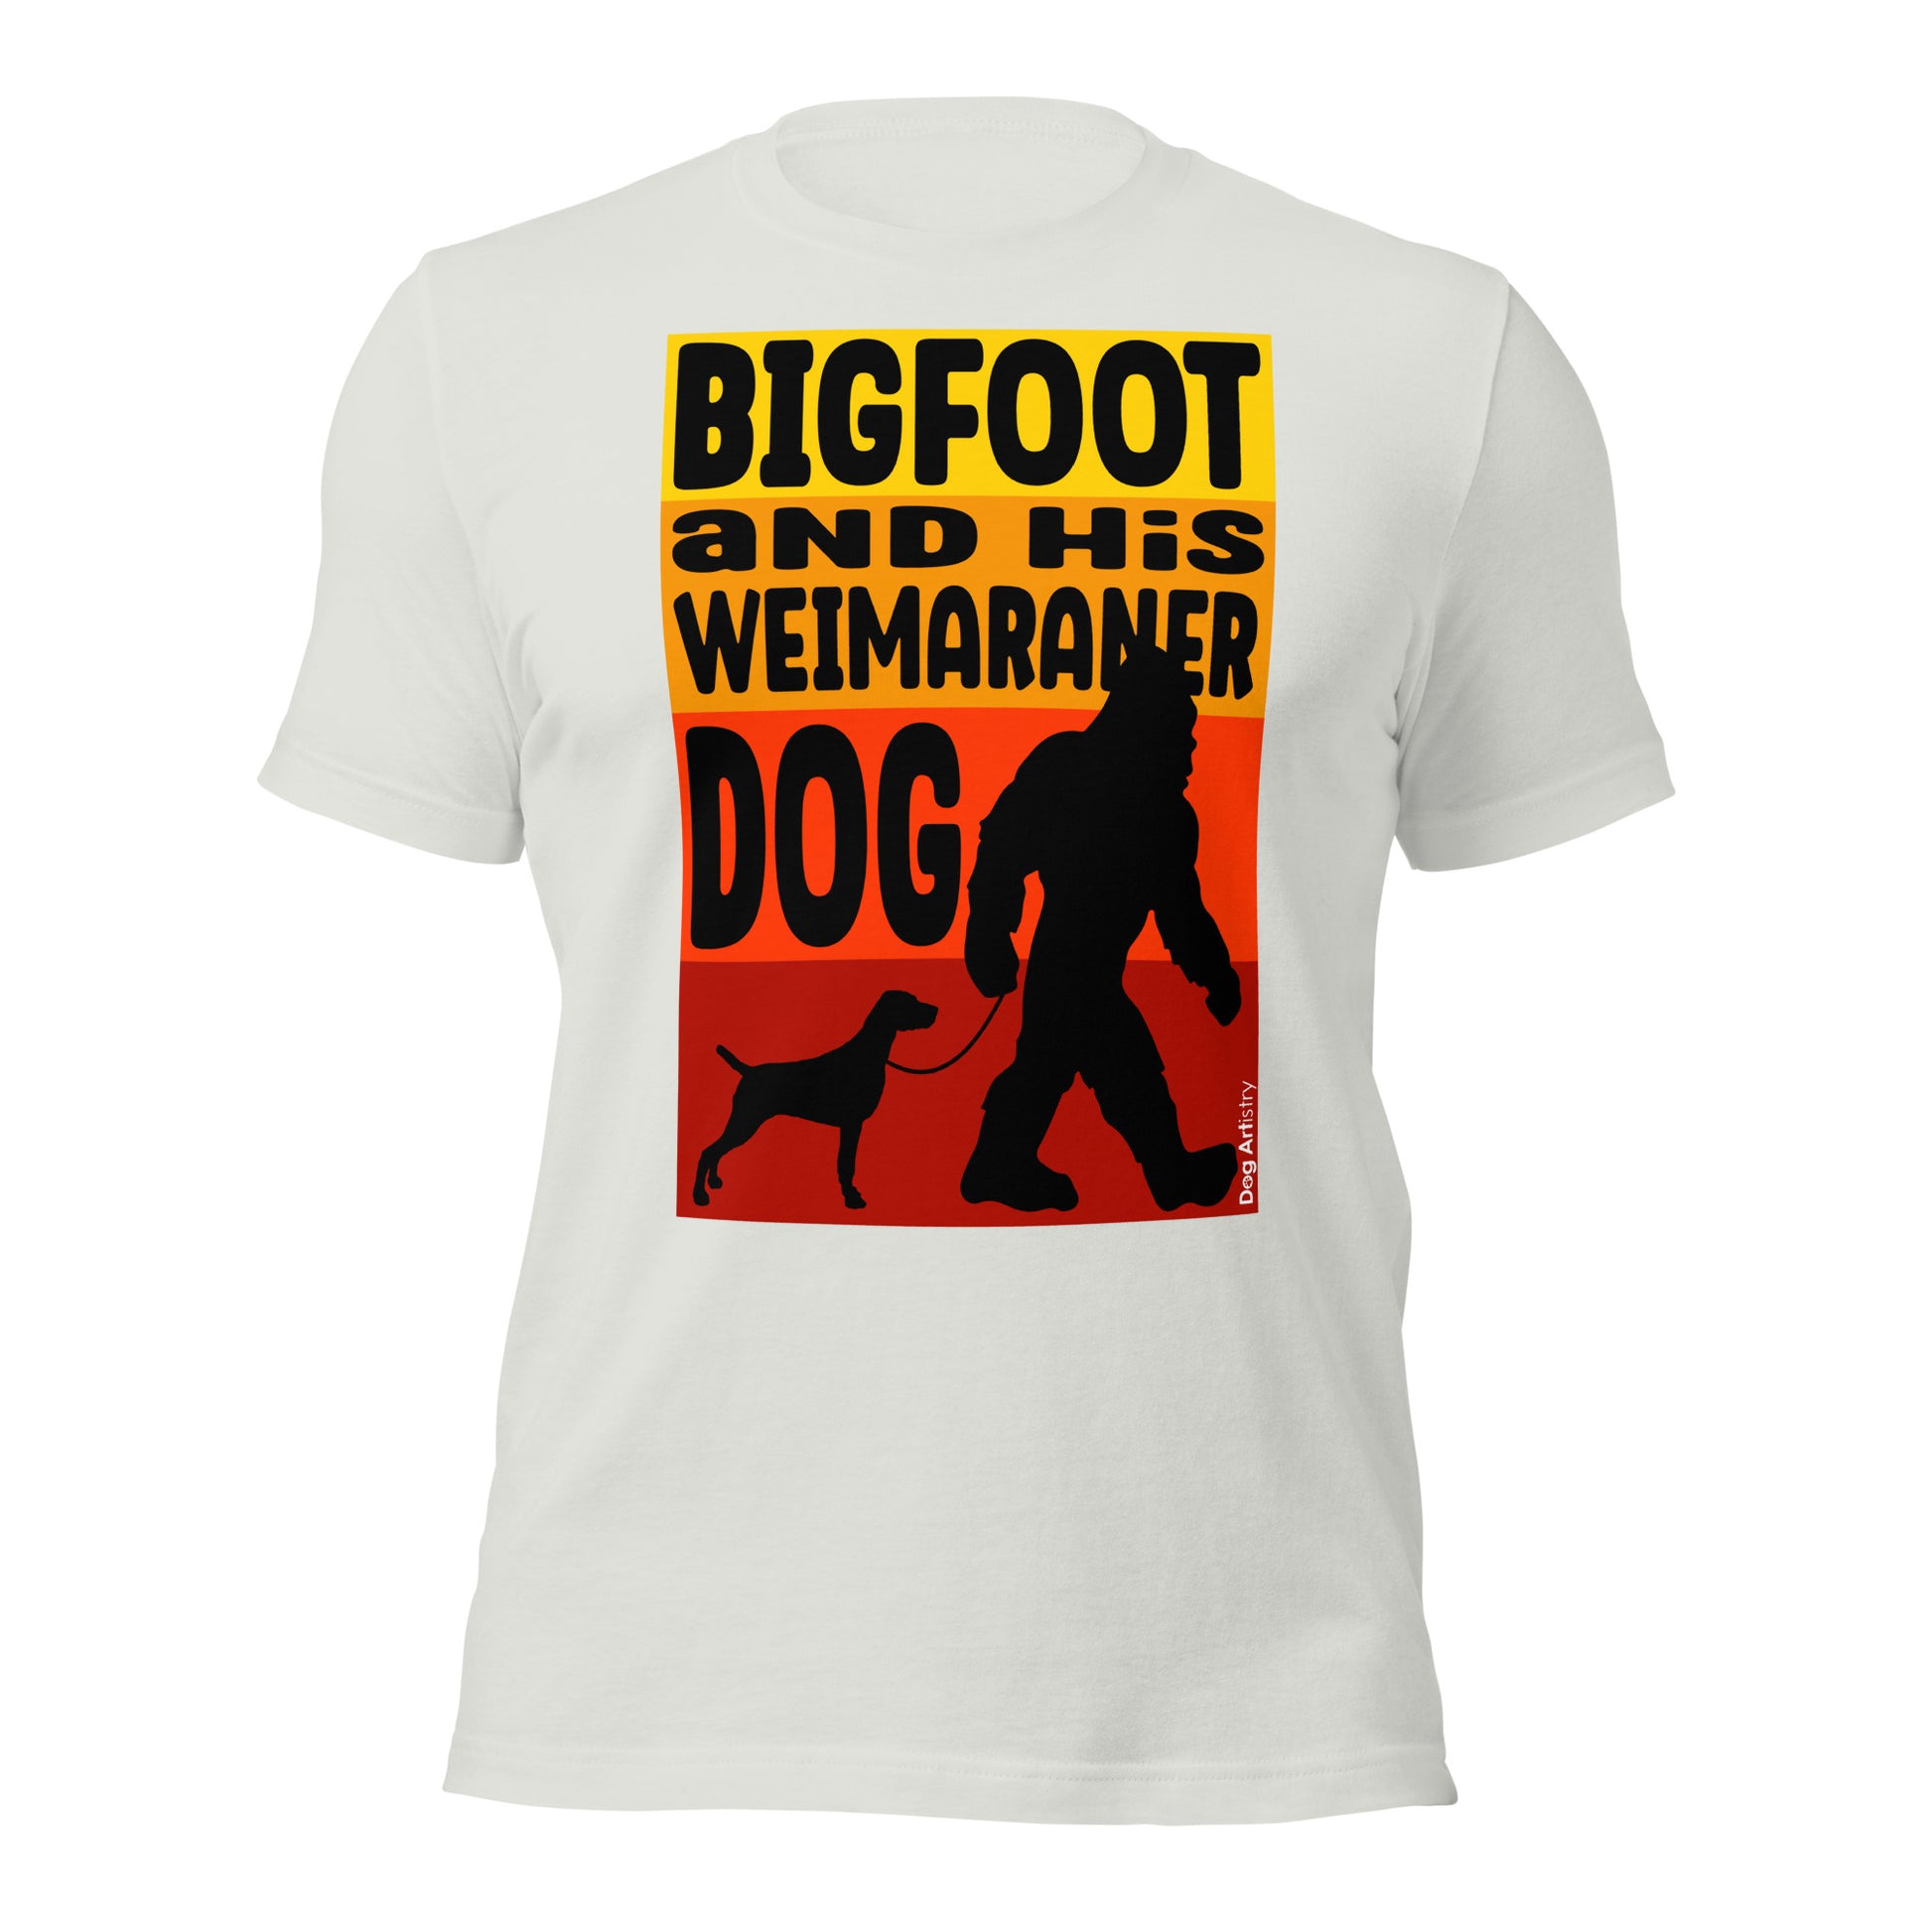 Bigfoot and his Weimaraner dog unisex silver t-shirt by Dog Artistry.